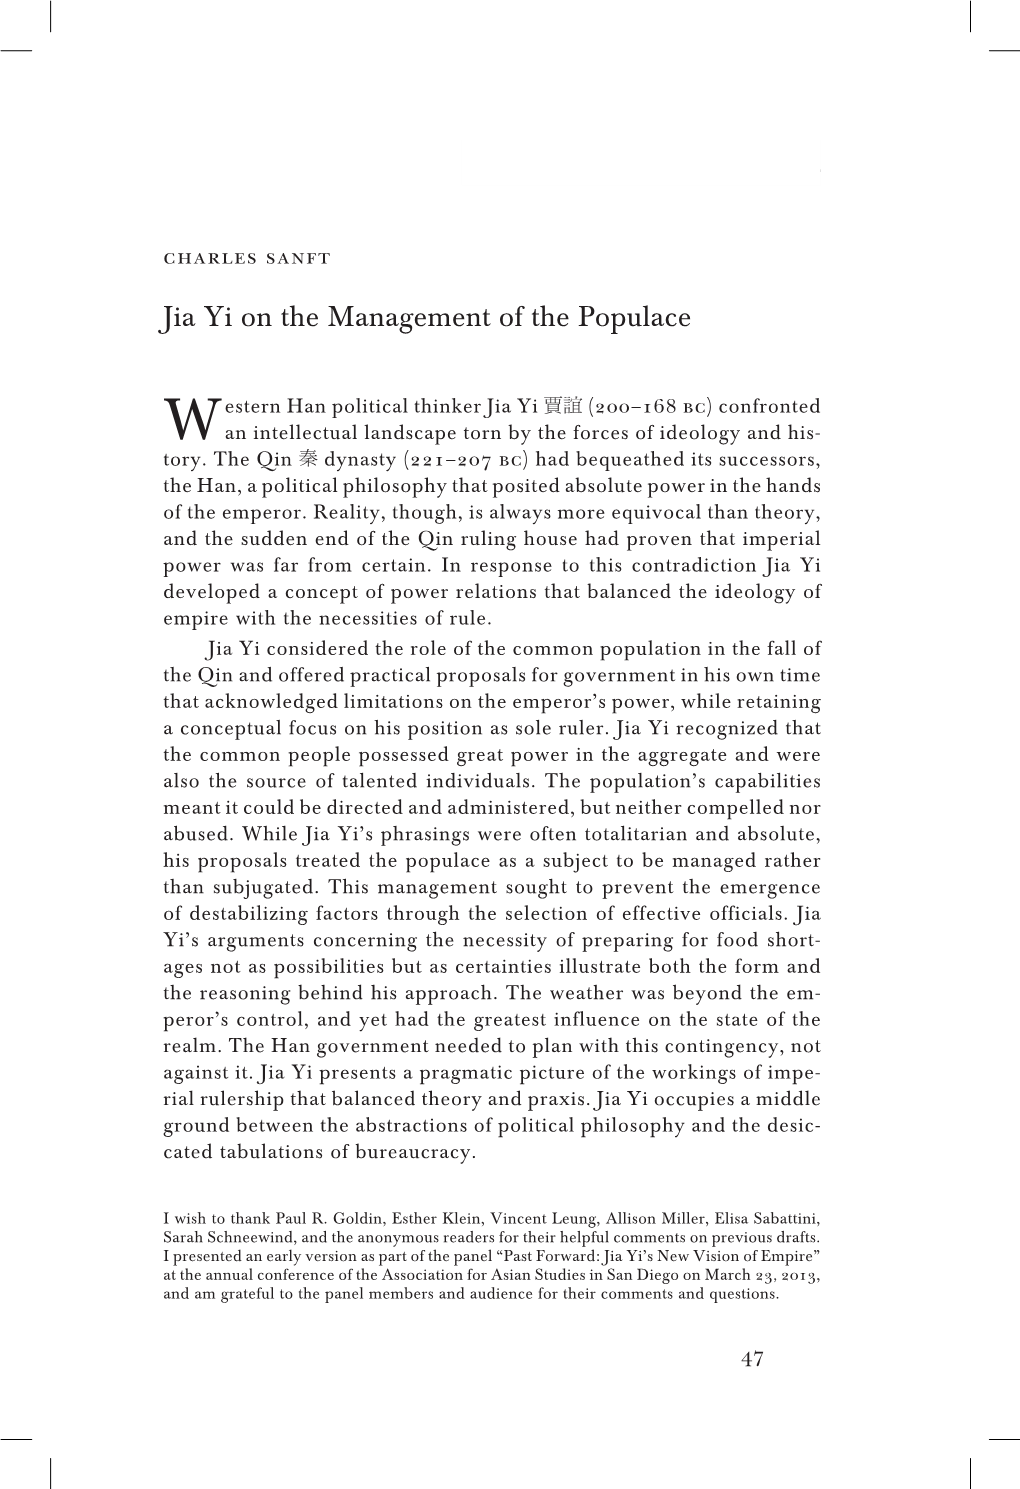 Jia Yi on the Management of the Populace